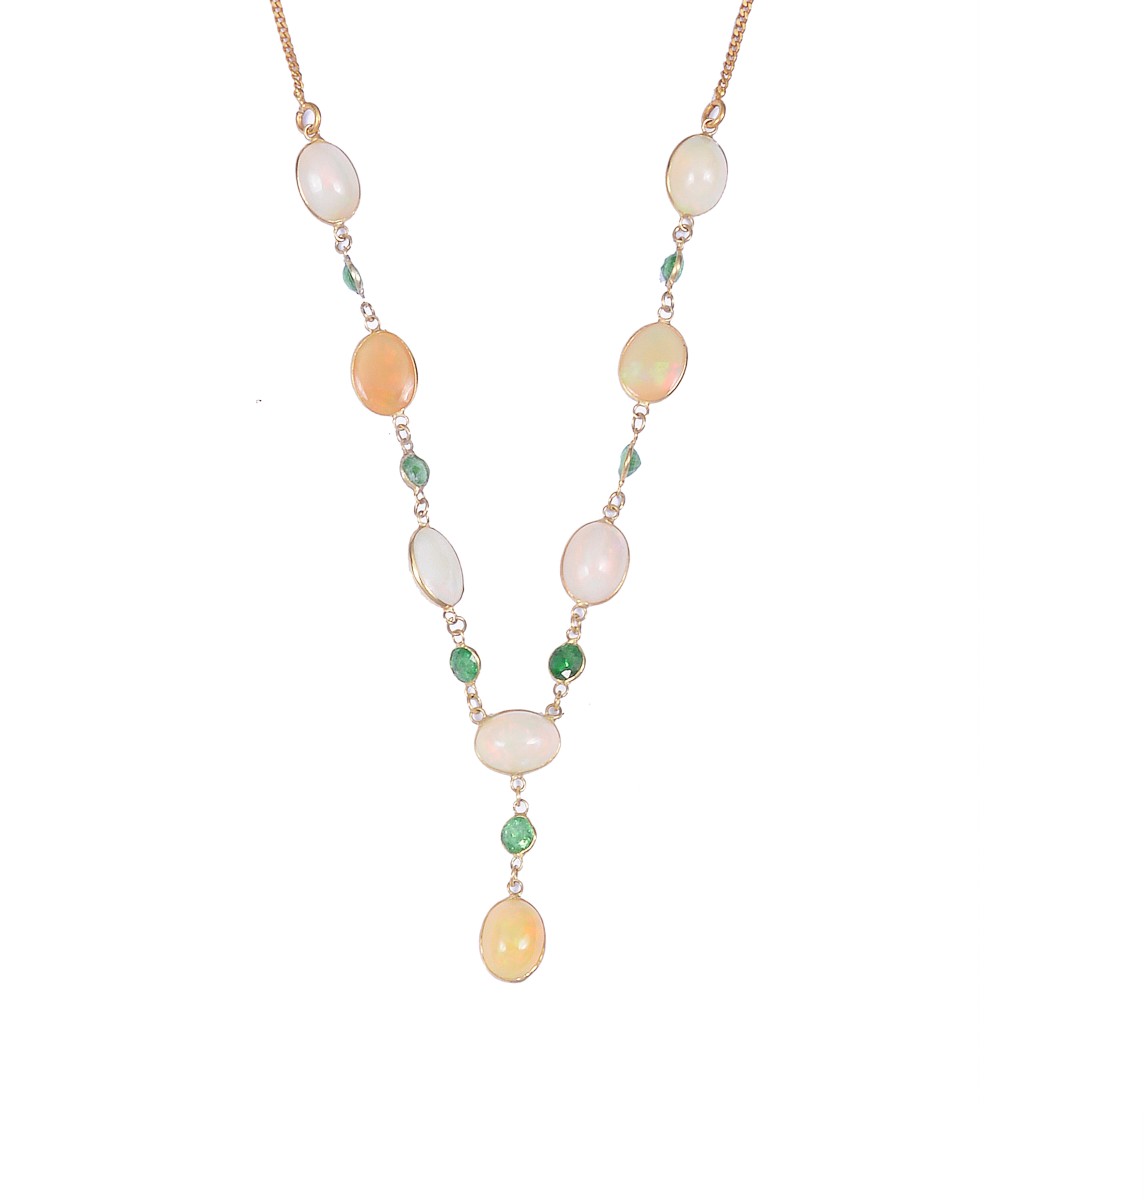 OPAL AND TSAVORITE GARNET NECKLACE designed as a row of spectacle-set alternating oval cabochon